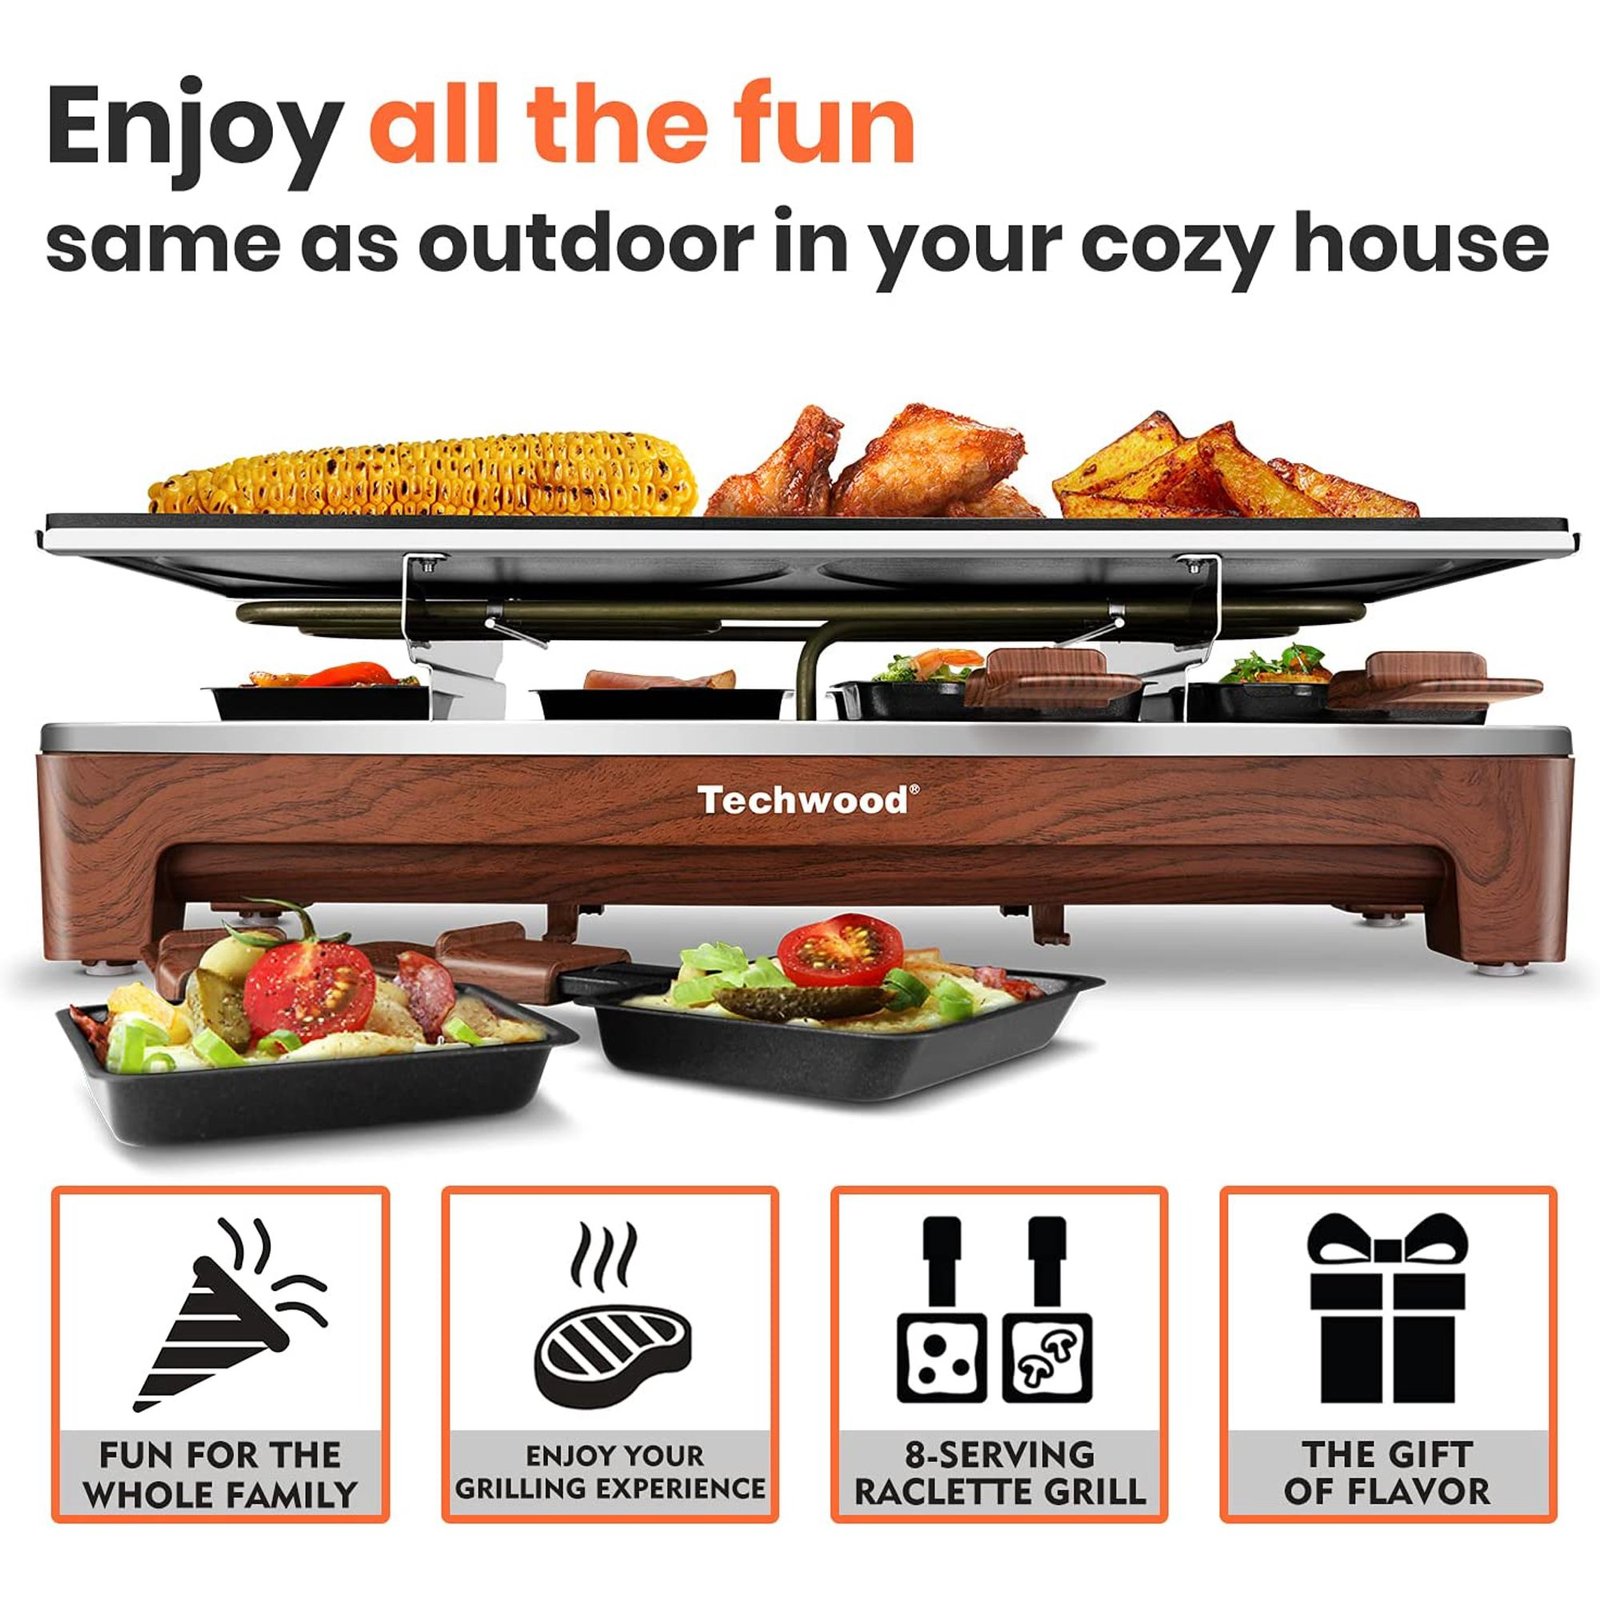 https://themarketdepot.com/wp-content/uploads/2023/01/Techwood-Table-Grill-Electric-Indoor-Grill-Korean-BBQ-Grill-1500W-Fast-Heating-with-8-Cheese-Melt-Pans-Wood-Grain-2.jpeg